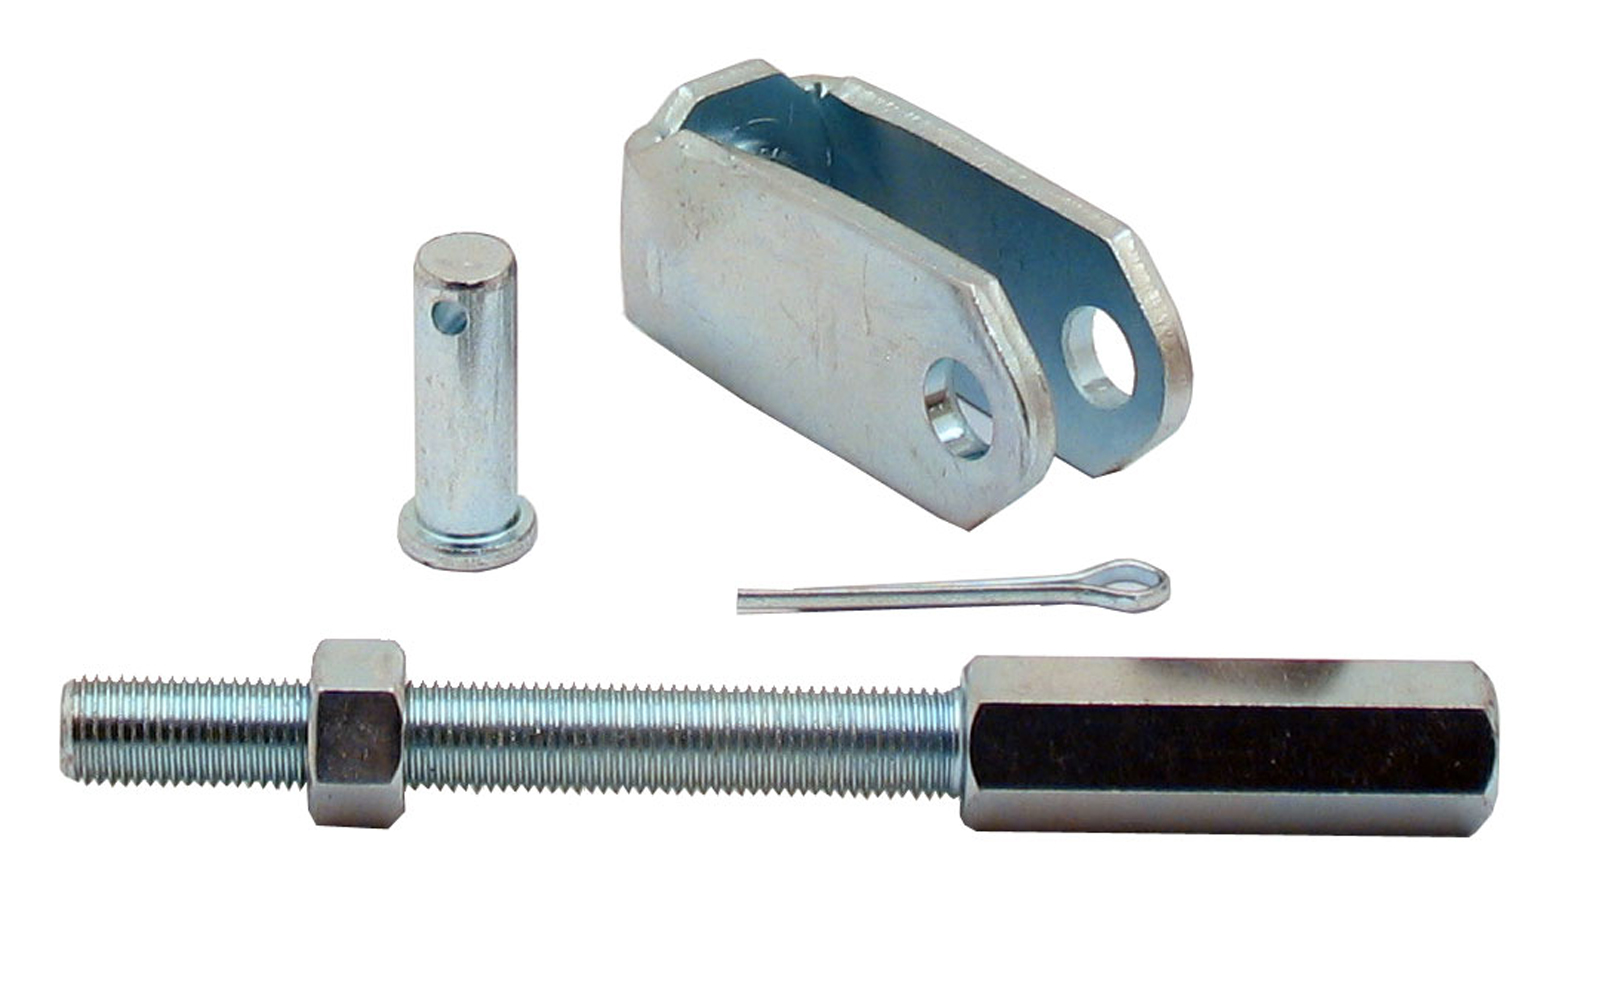  Universal 4 3/4 Long Pedal Rod Extension & Clevis